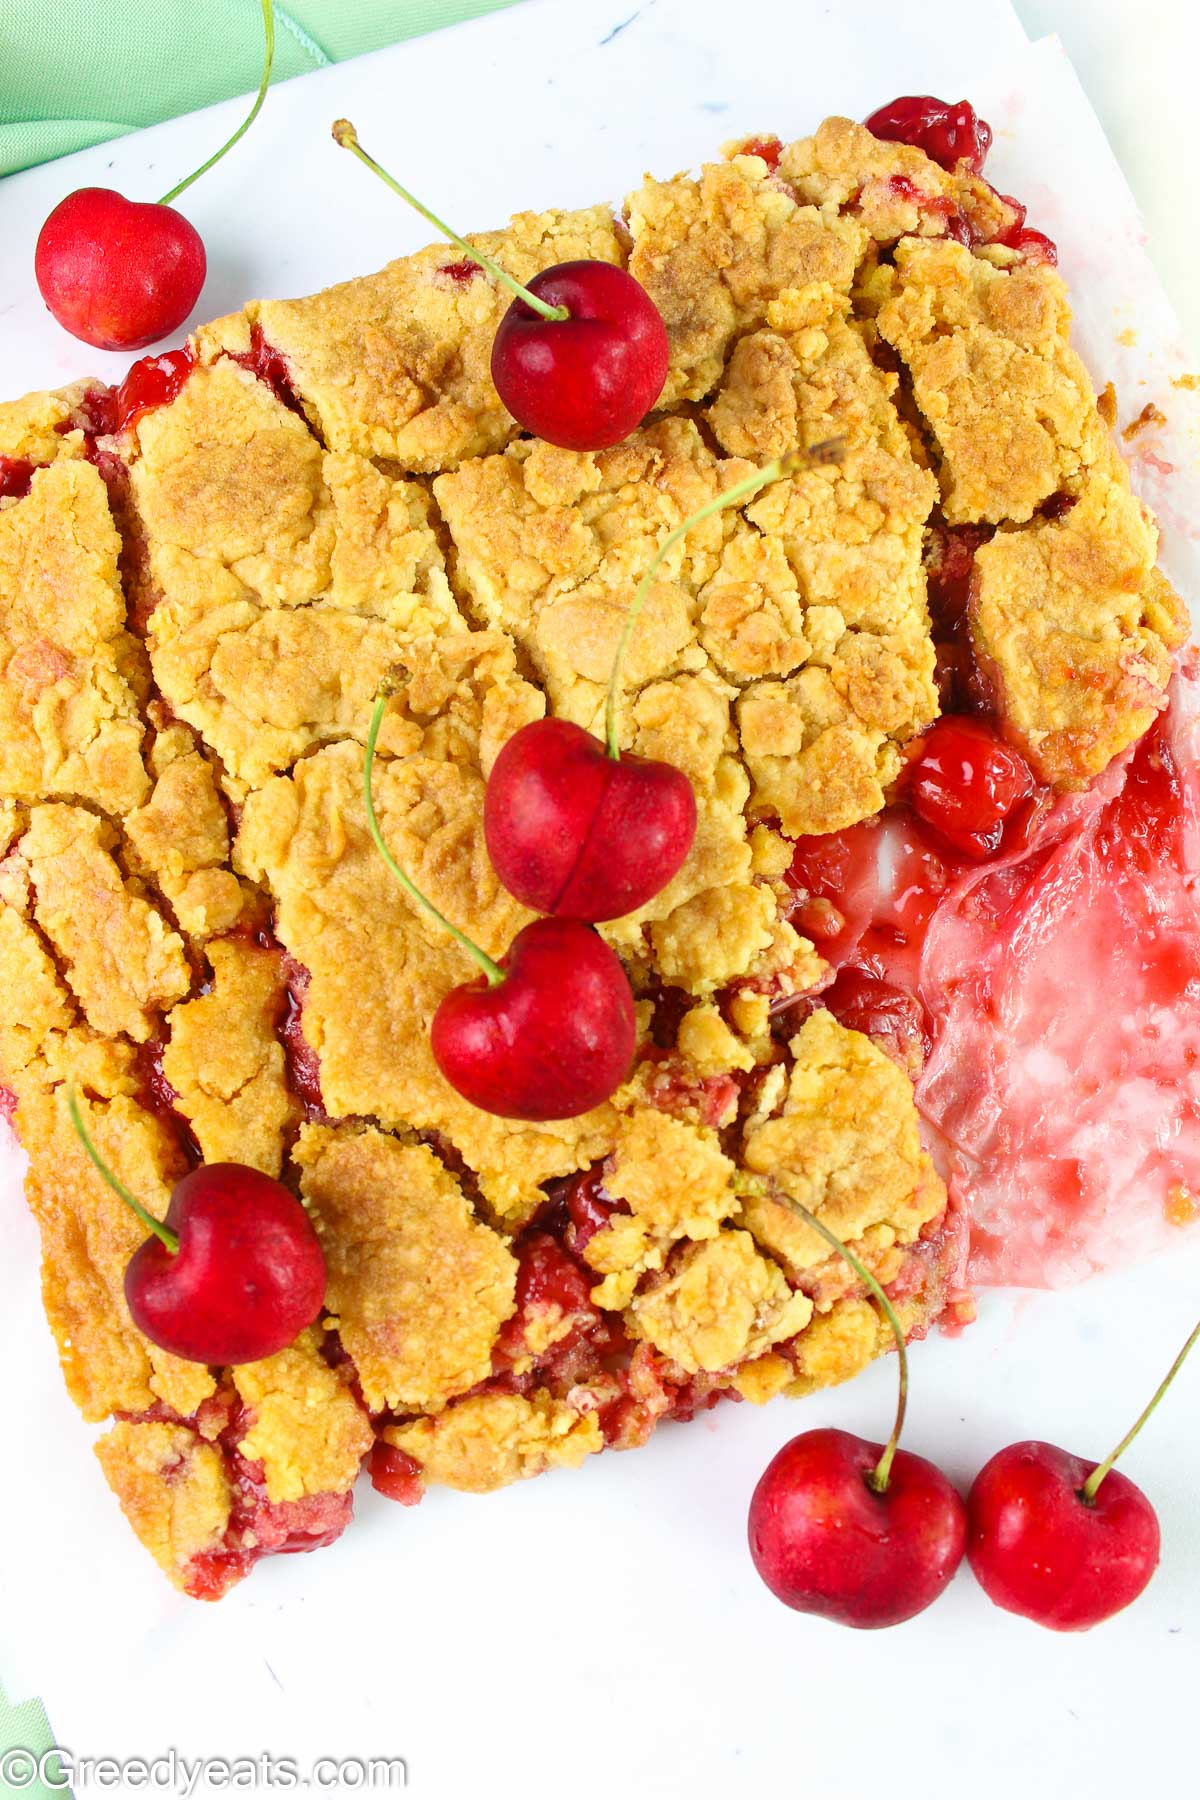 Baked golden brown dump cake topped with a few fresh cherries.